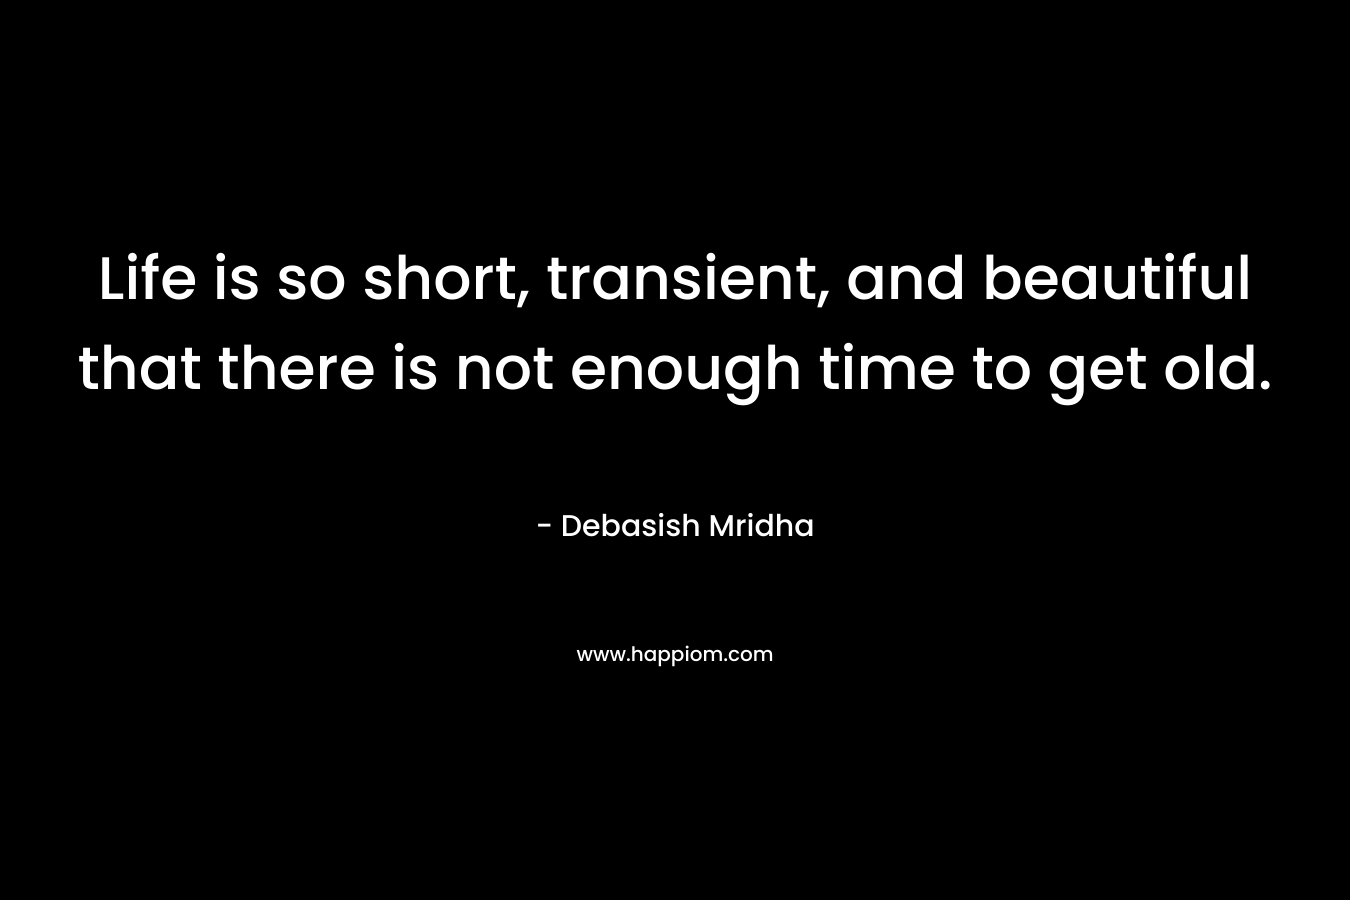 Life is so short, transient, and beautiful that there is not enough time to get old. – Debasish Mridha